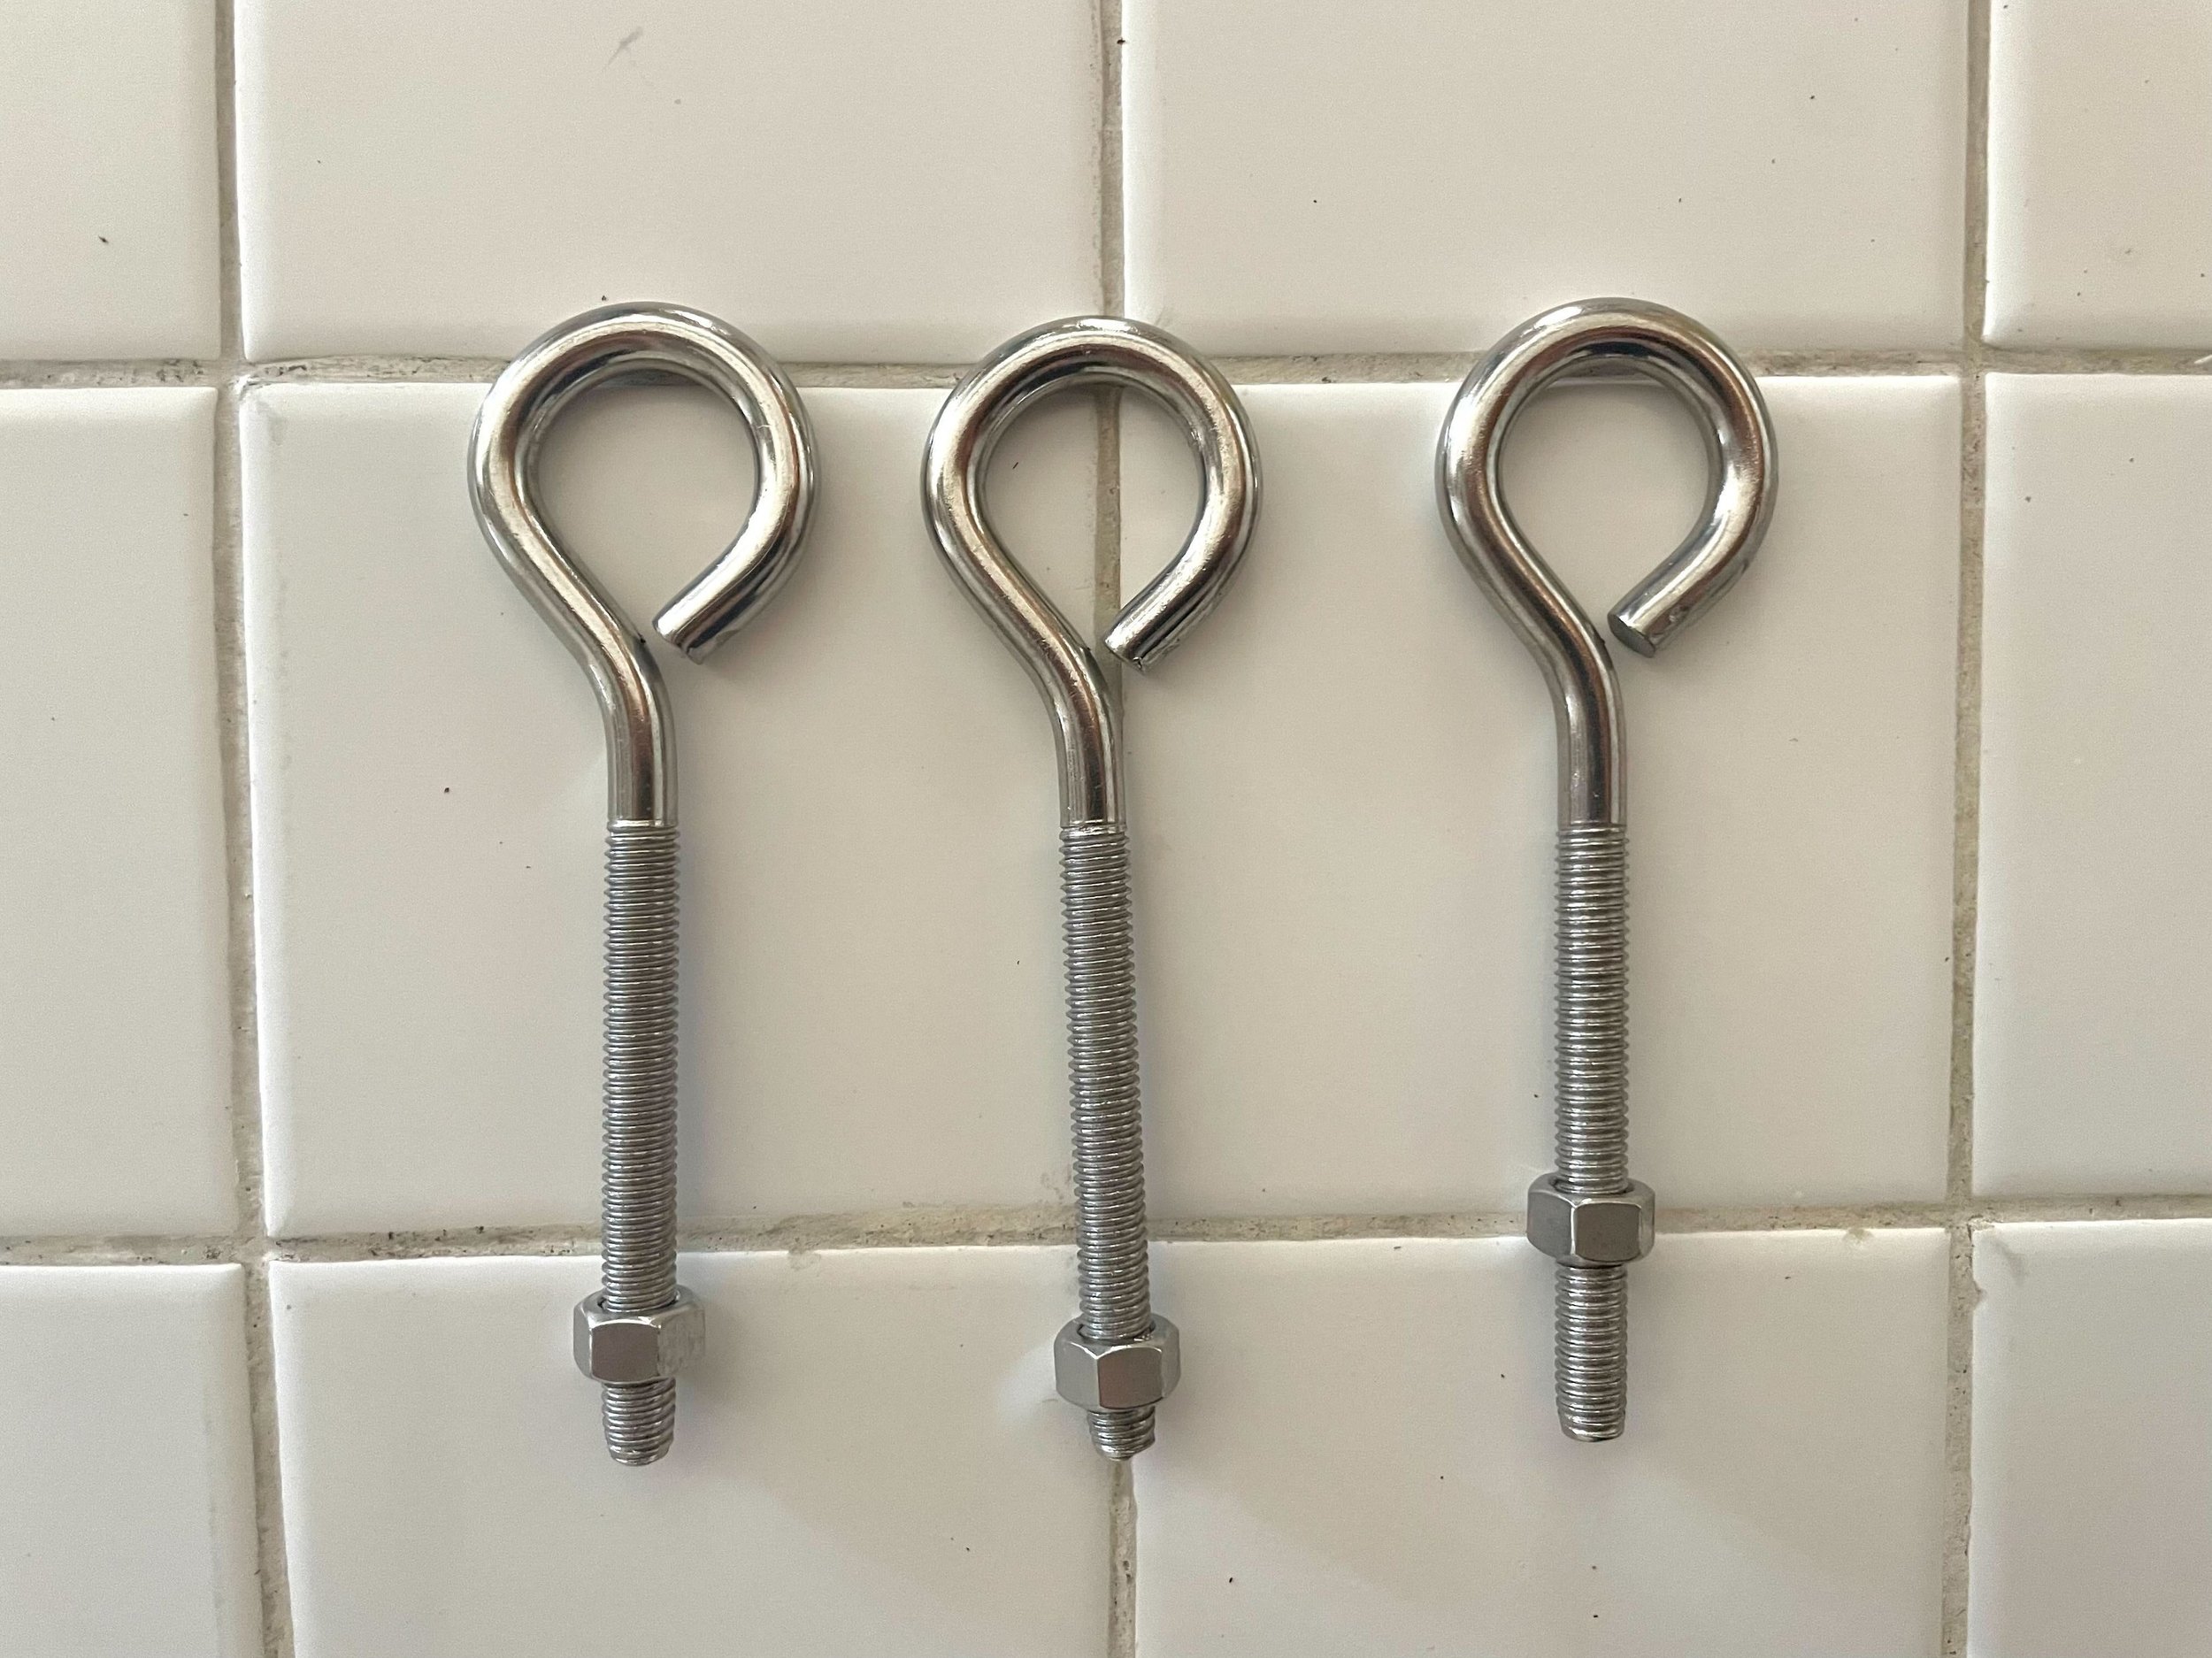 1 to 3 Eye Bolts